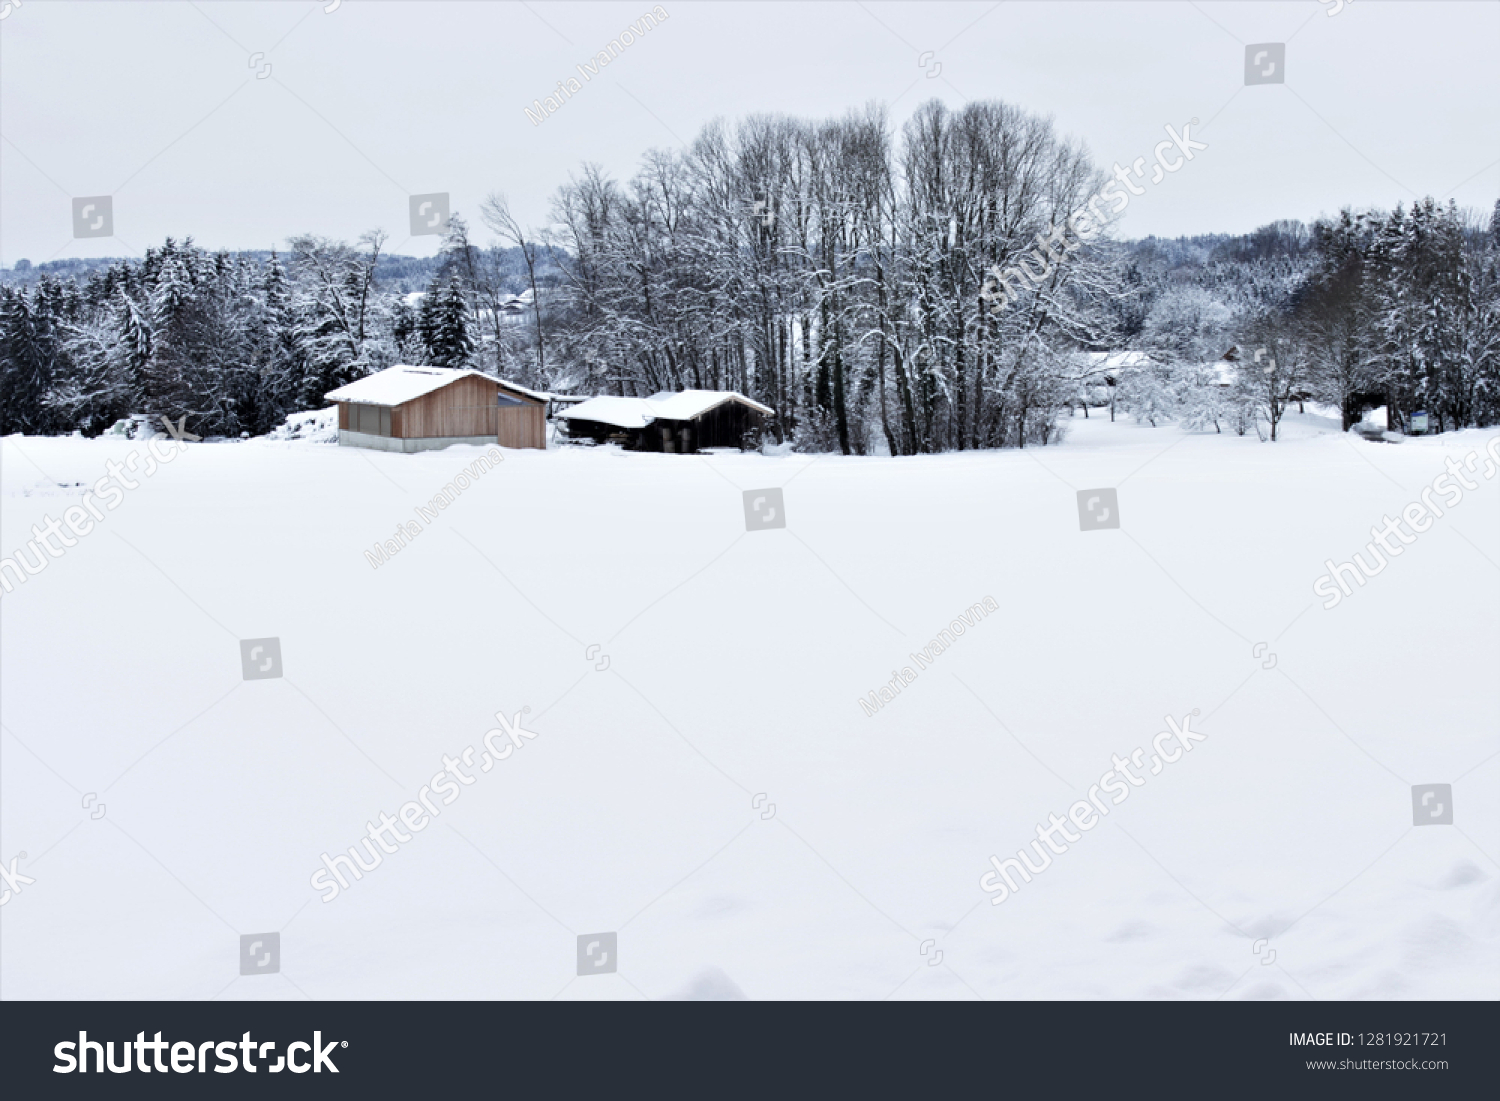 Huts in a wintry landscape #1281921721